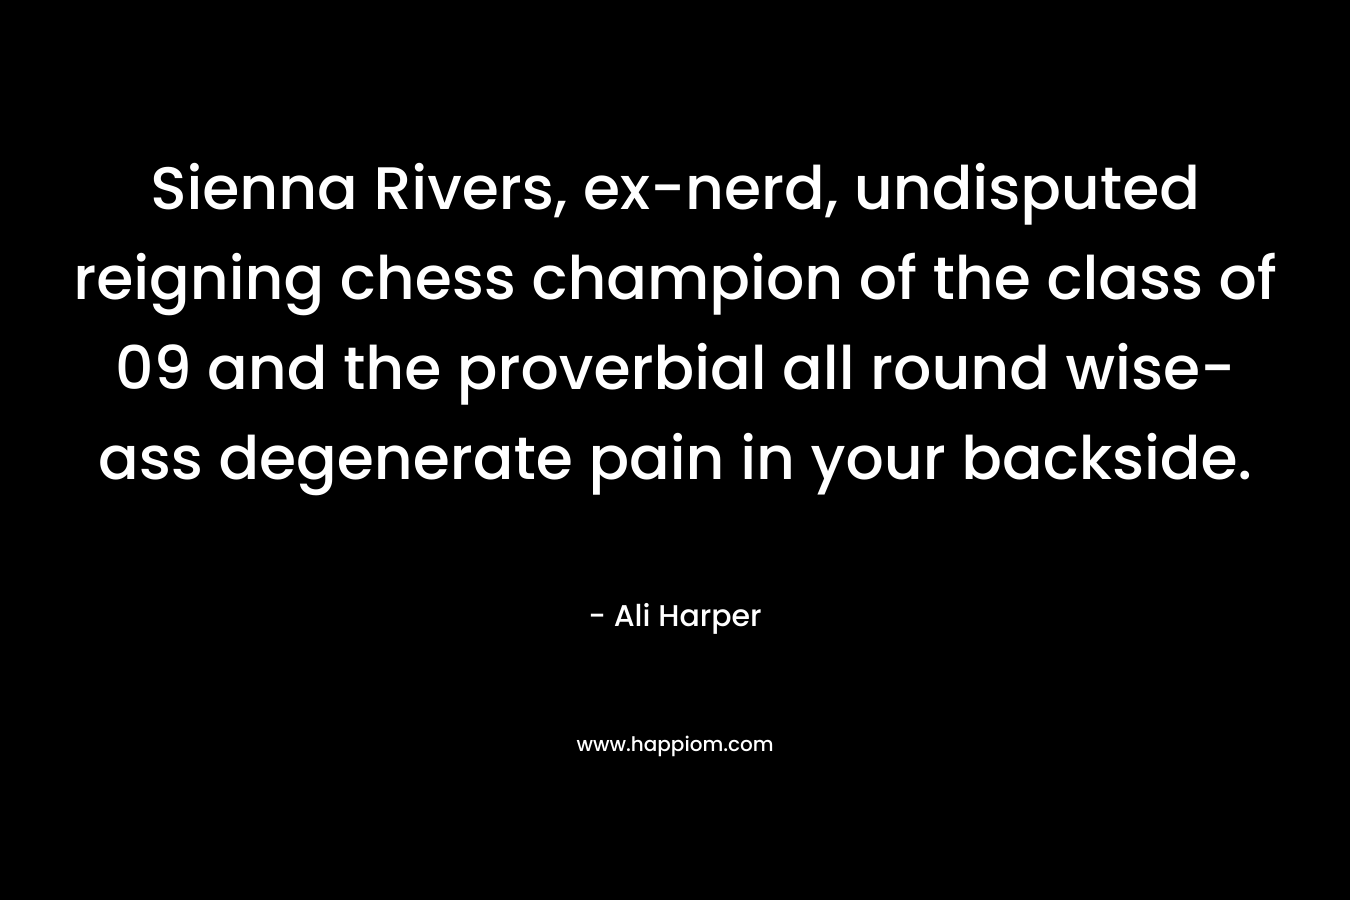 Sienna Rivers, ex-nerd, undisputed reigning chess champion of the class of 09 and the proverbial all round wise-ass degenerate pain in your backside. – Ali Harper